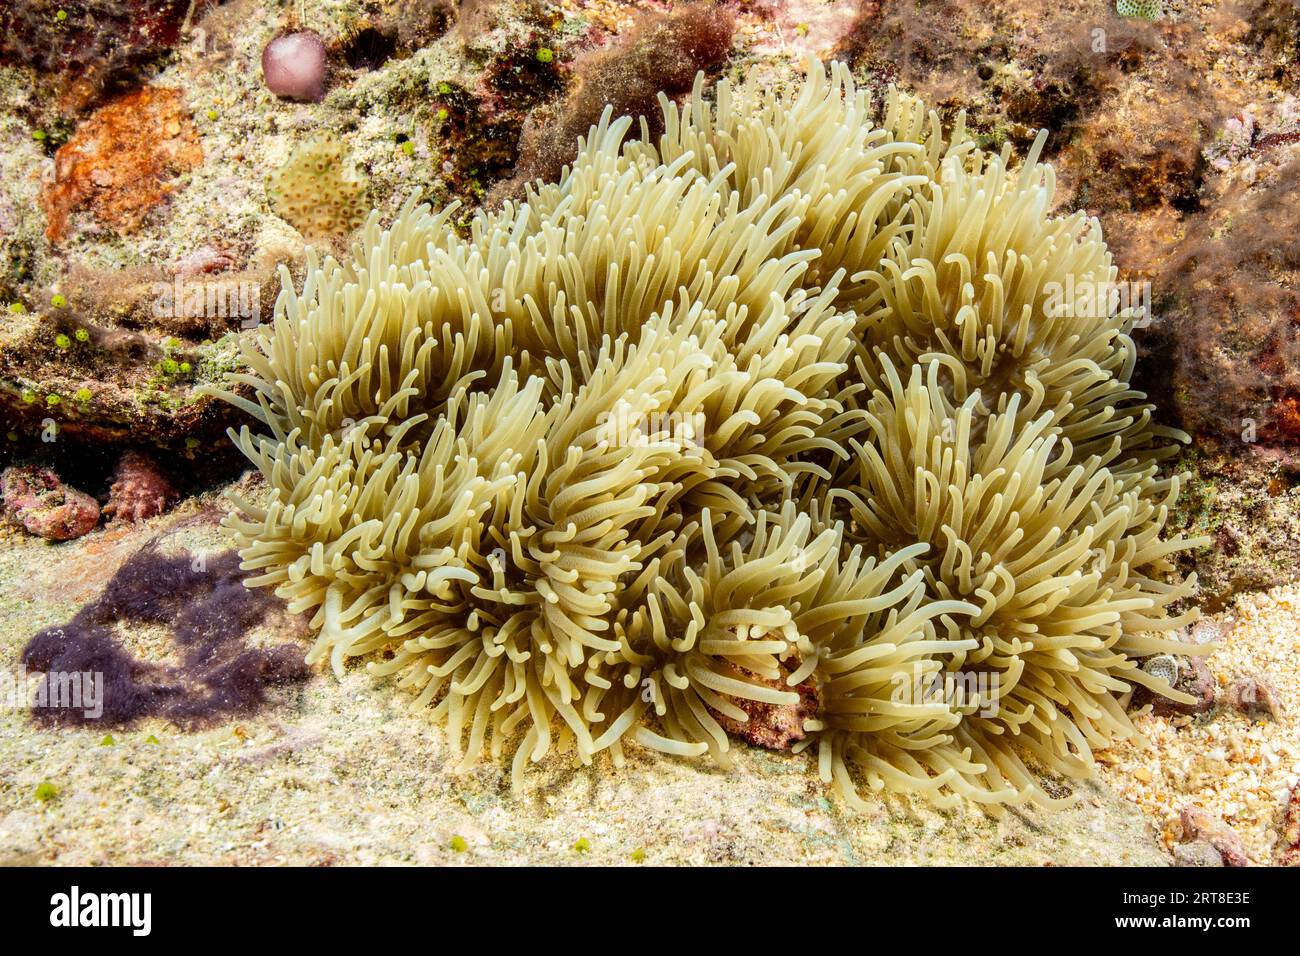 Sea anemone sebae anemone (Heteractis crispa) lives on sandy seabed sandy seabed in temperate marine depth off coral block in coral reef, Pacific Stock Photo